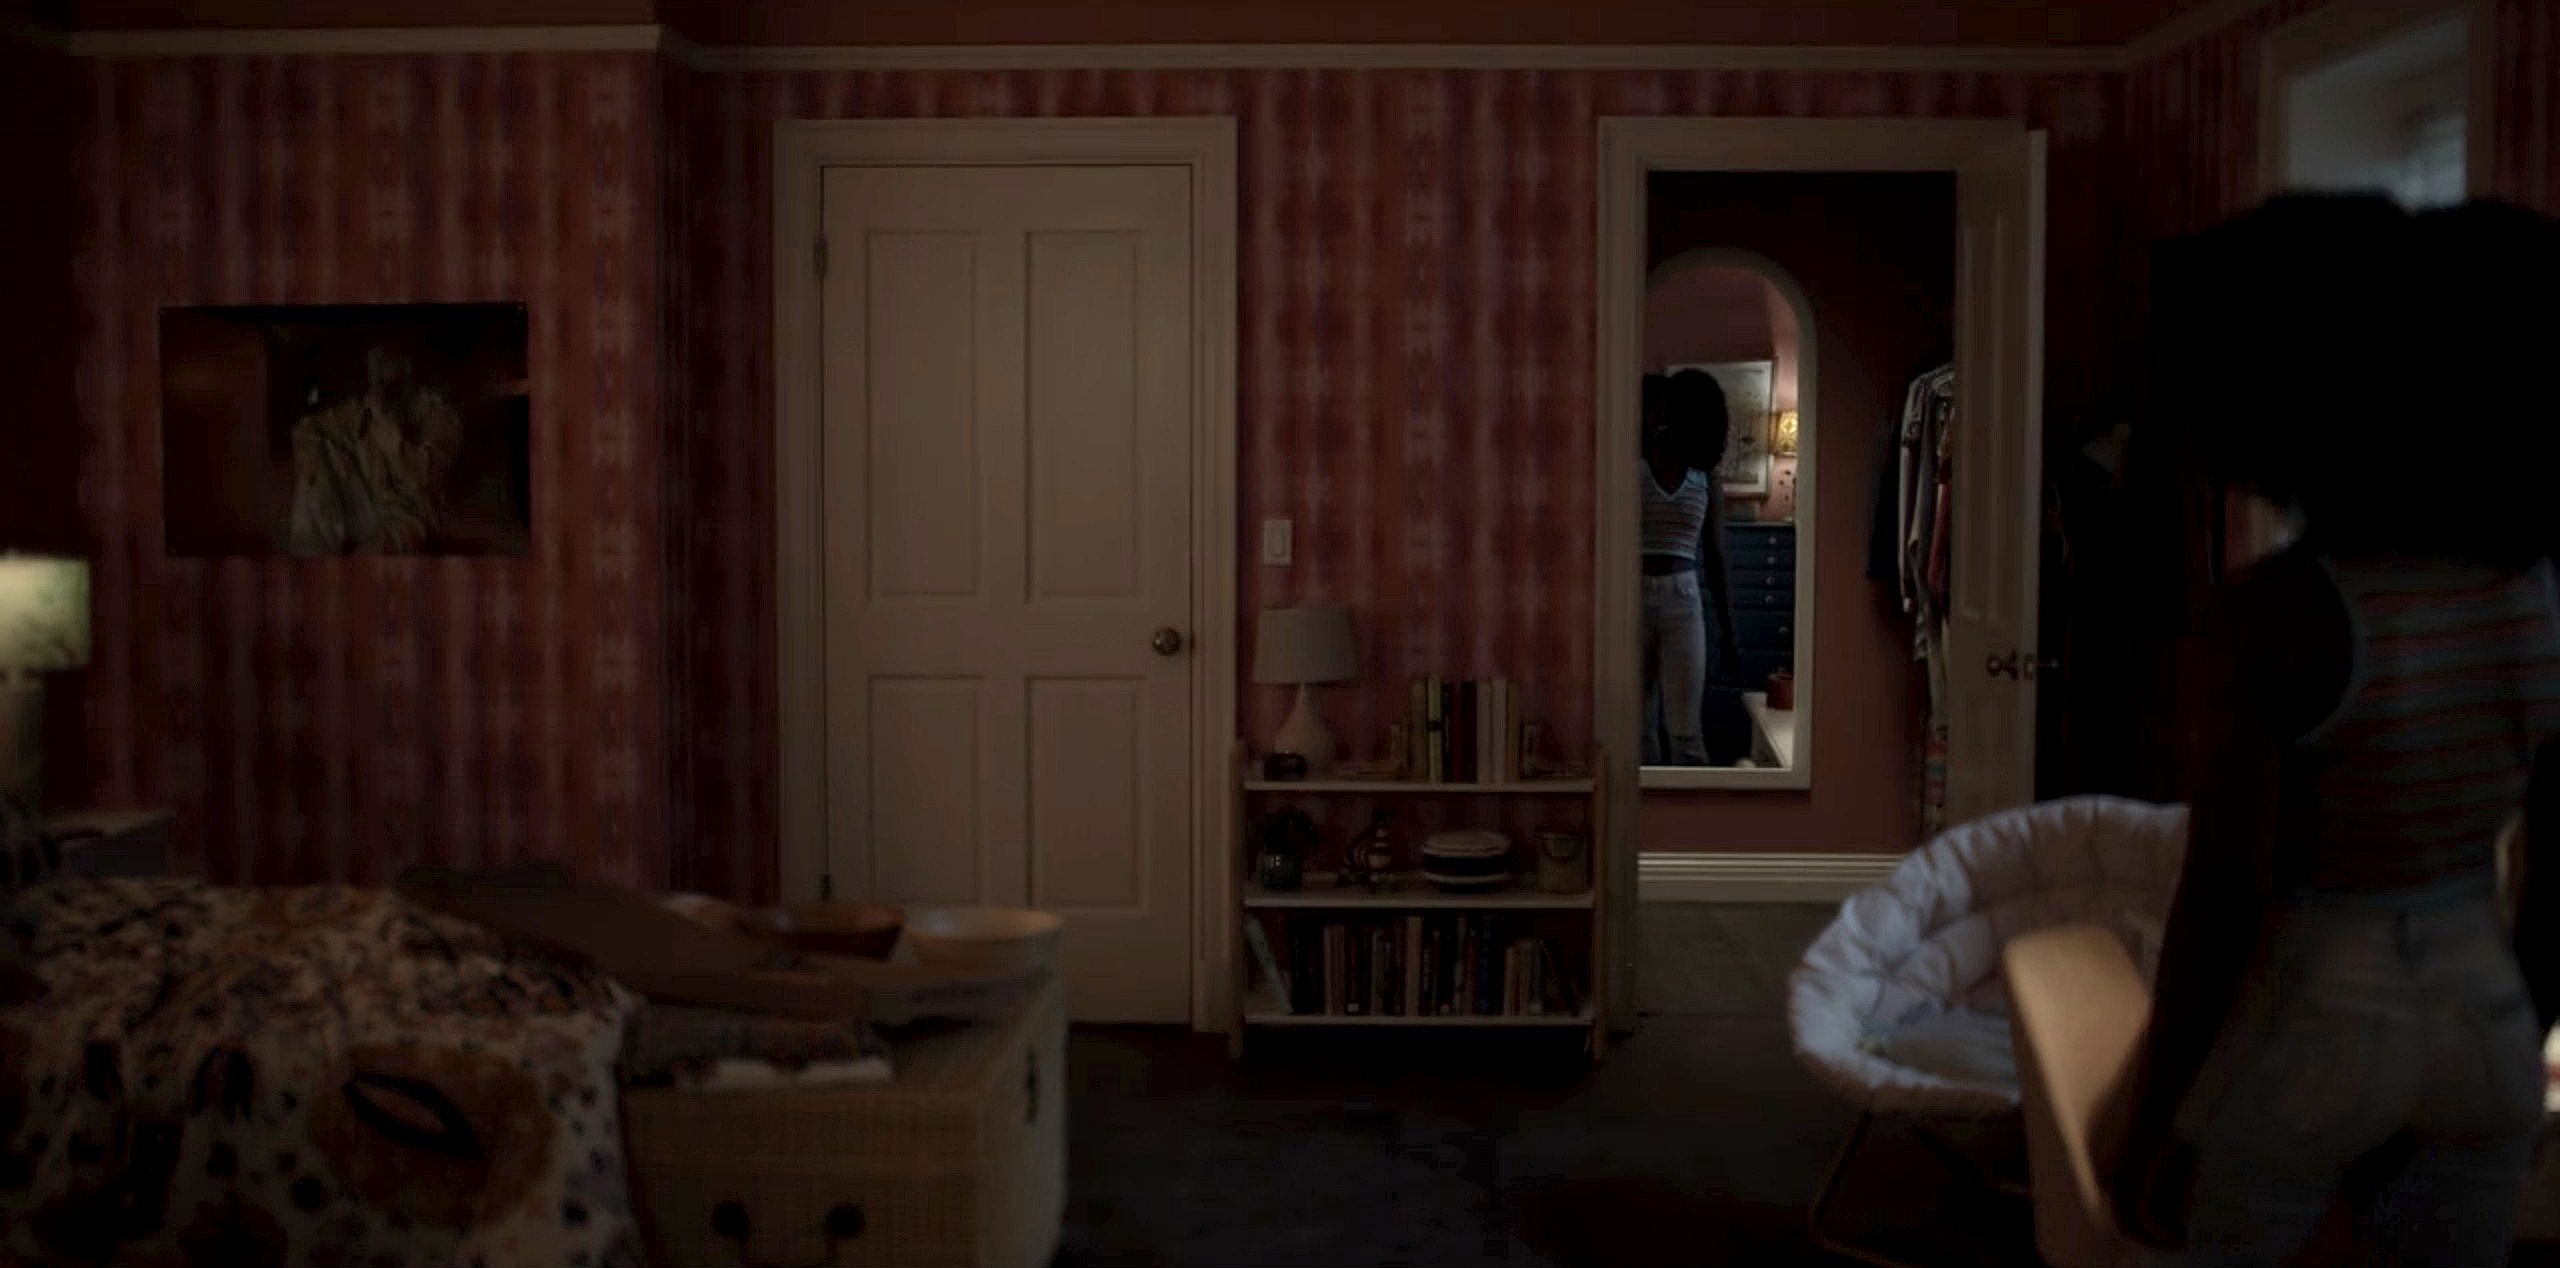 Lena's bedroom in American Horror Stories "Bloody Mary"